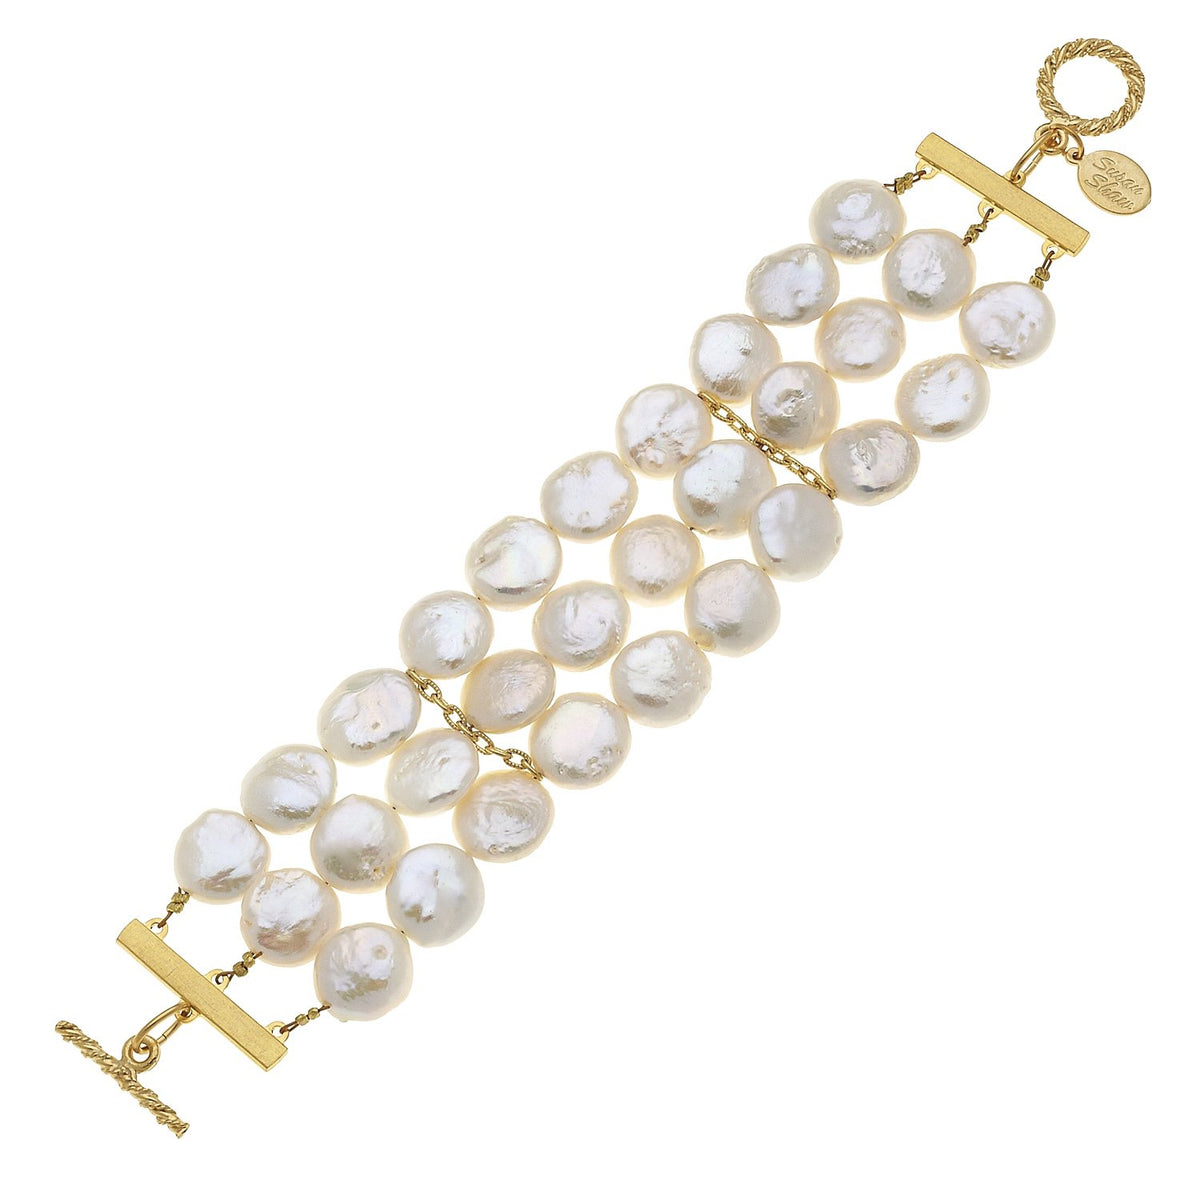 Gilt 3-row bracelet with color stones and pearls